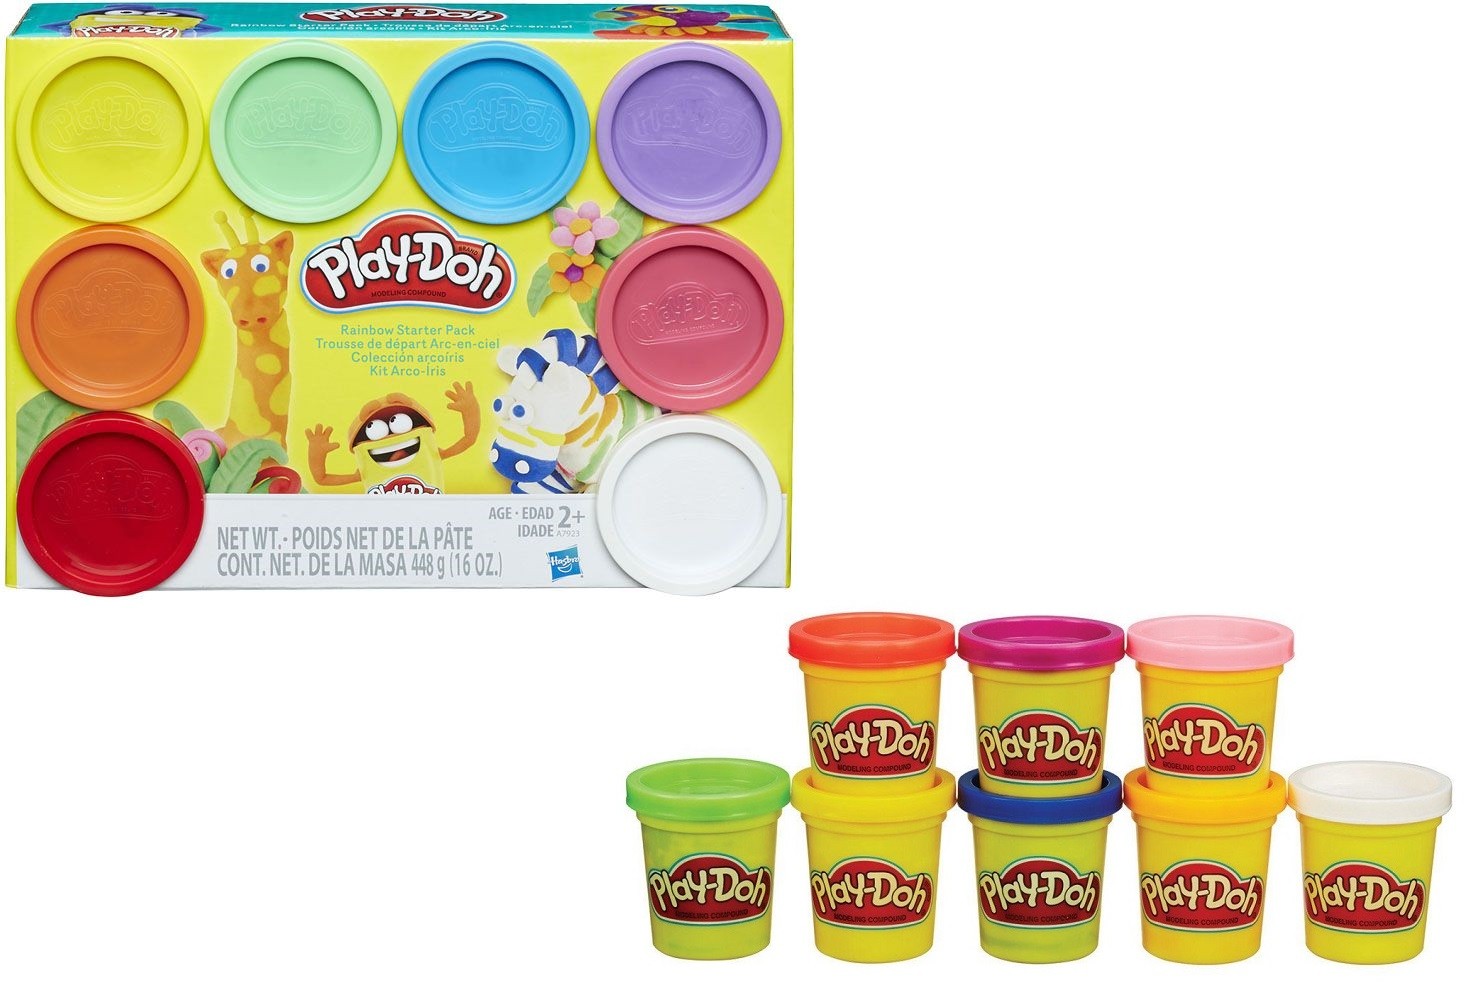 Play-Doh 16oz Rainbow Modeling Compound Starter Pack 8pc